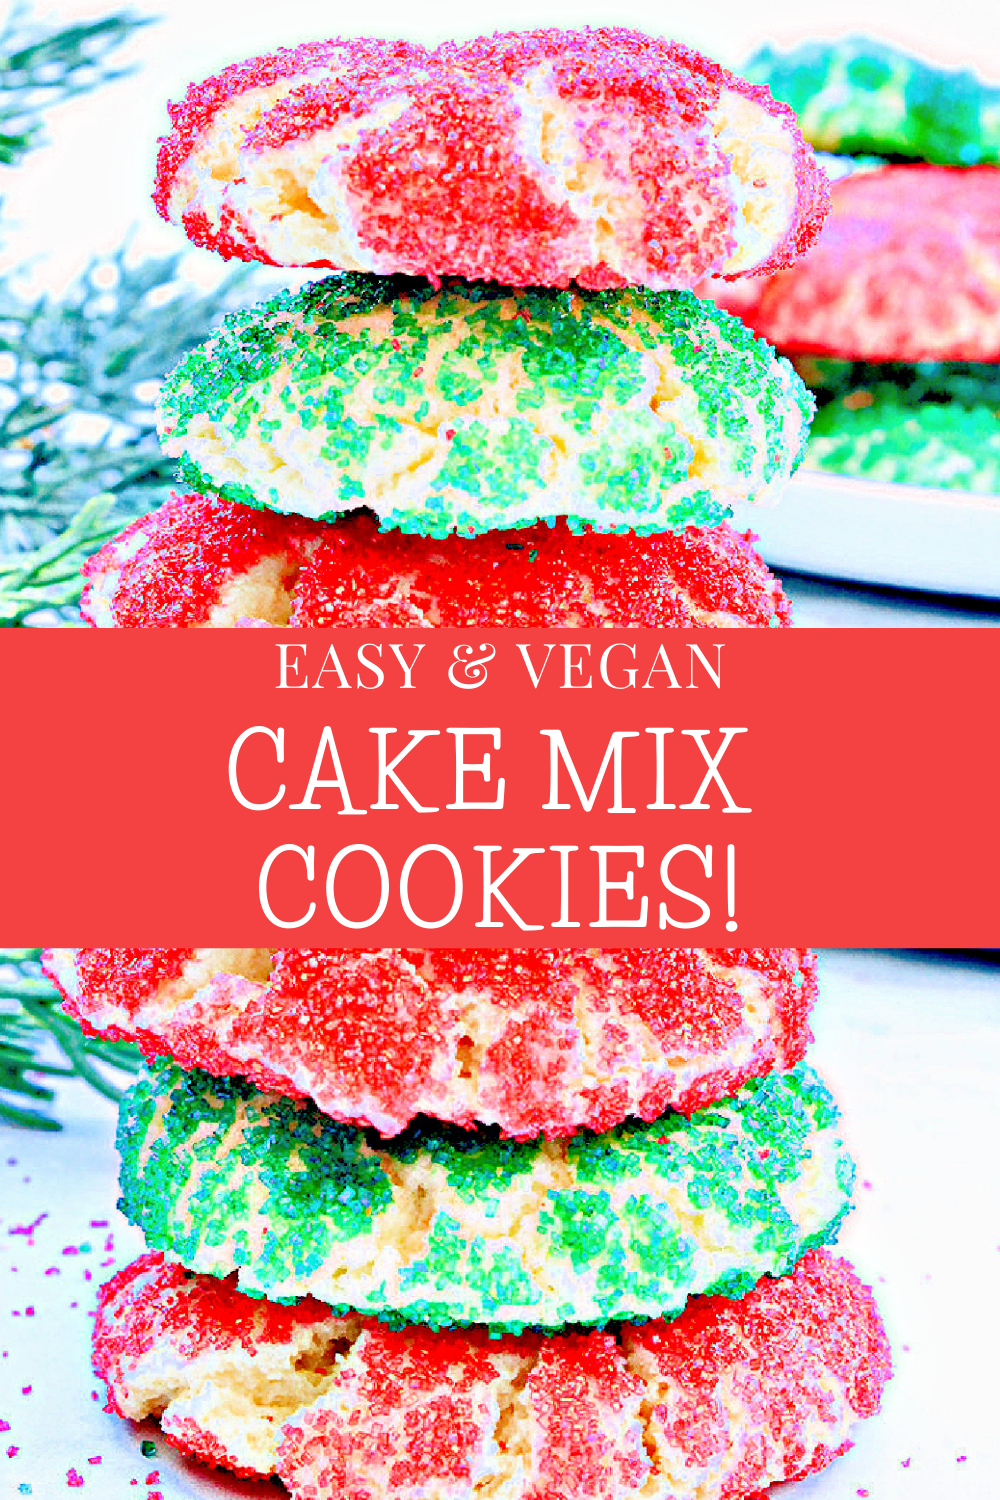 Cake Mix Cookies ~ These dairy-free cake mix cookies are fun and easy to make! Whip up a batch and watch them disappear! via @thiswifecooks